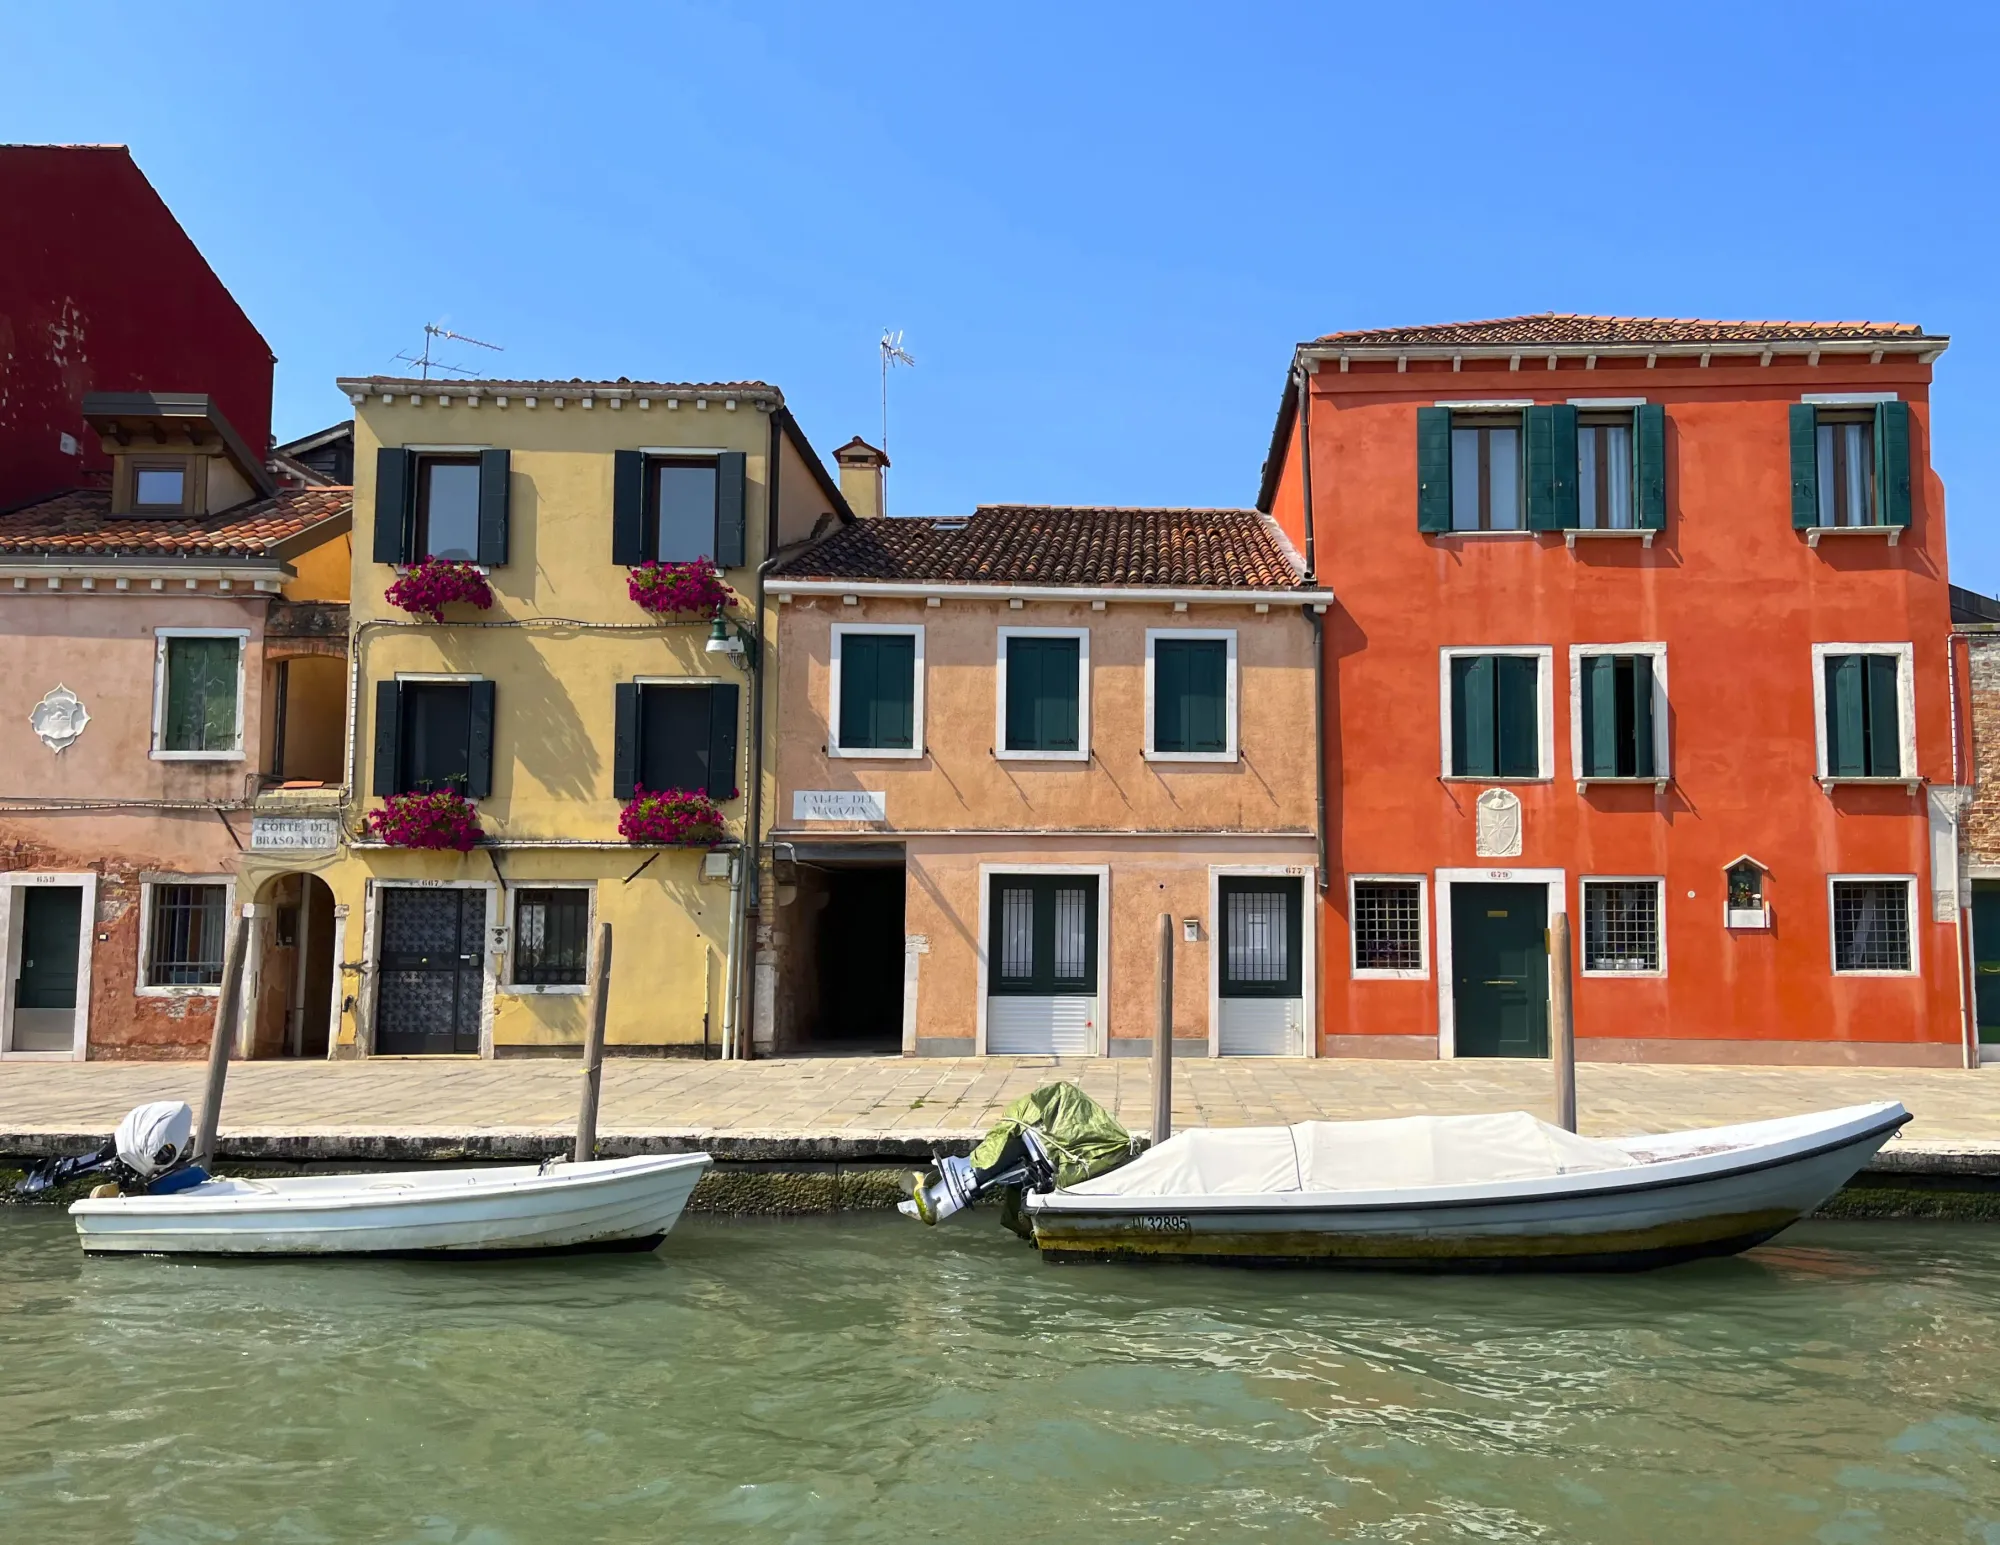 Pastel home fronts with two white boats moored in the water